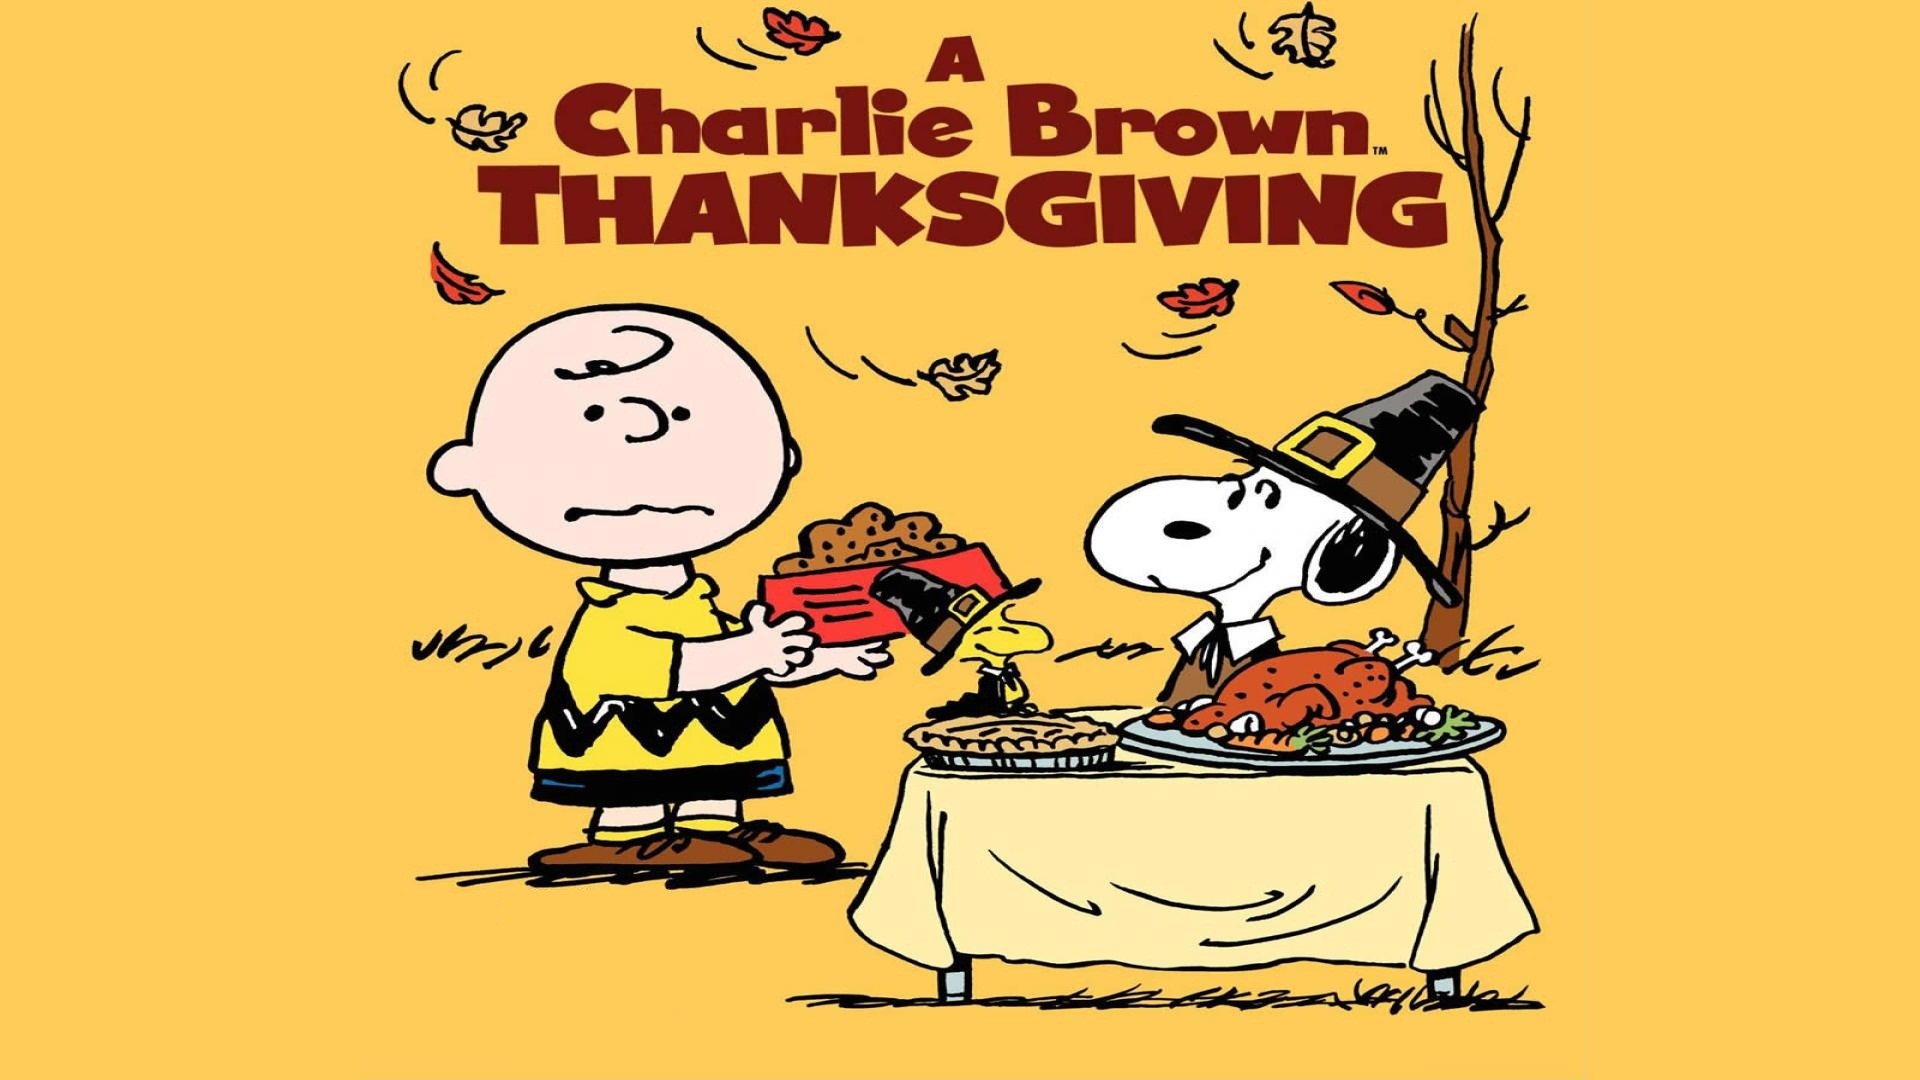 1920x1080 ... funny thanksgiving cartoon wallpapers for desktop free hd ...